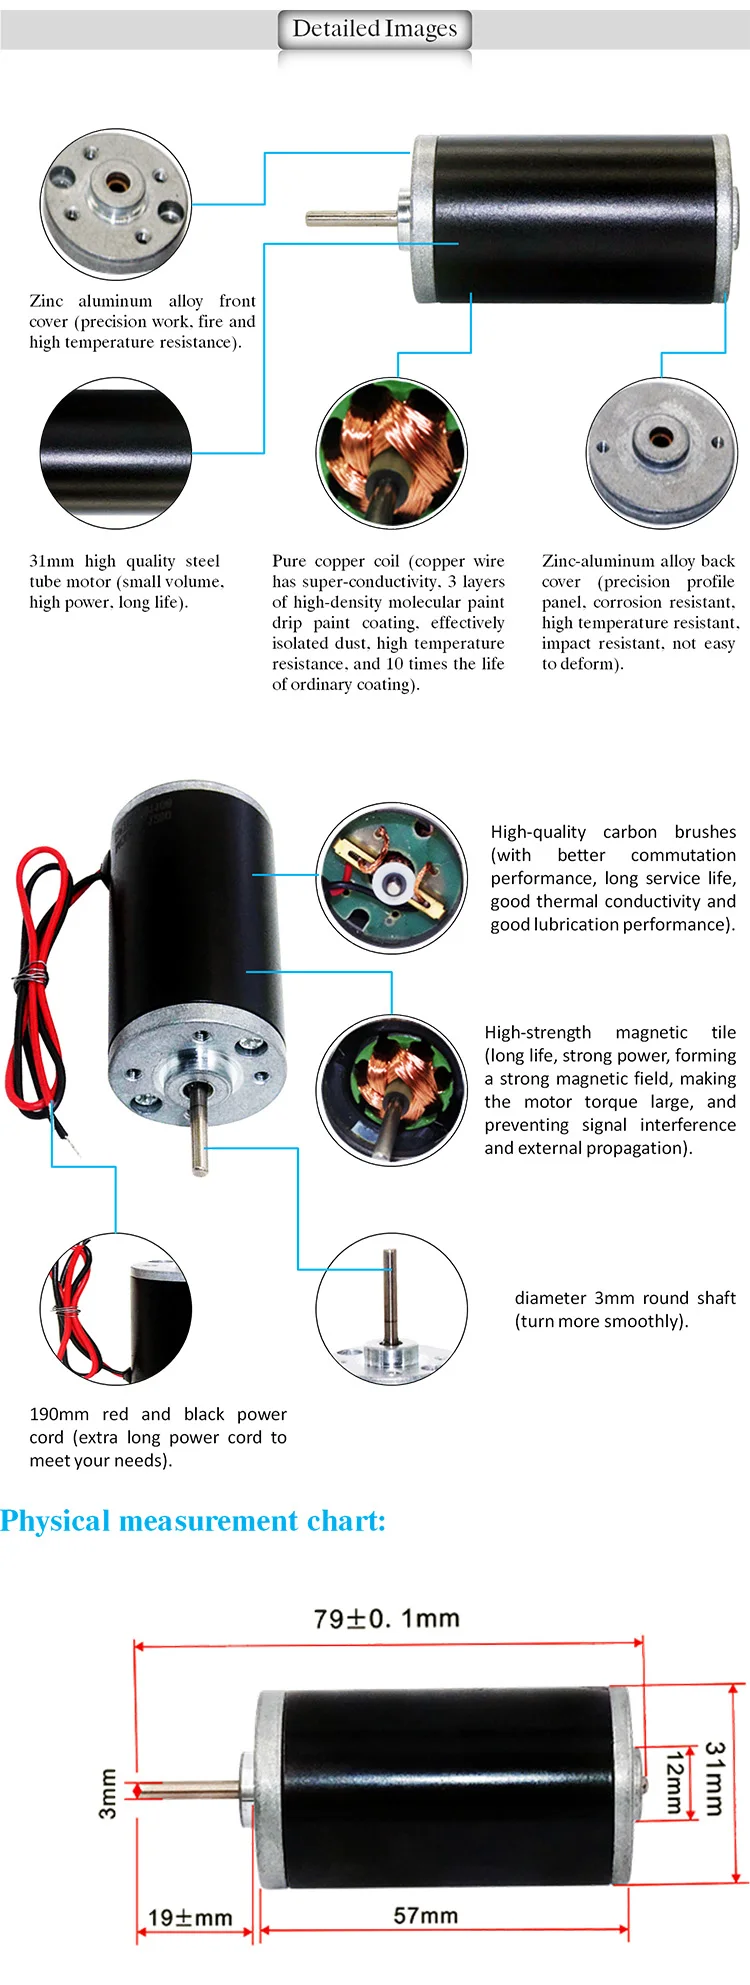 V : Others ontact us RPM 31ZY 6V/12V/24V Permanent Magnetic DC Carbon Brush Motor High Speed CW/CCW DC Motor Speed : 12V Zkenshan-DIY Motor DC Motor Easy to Install Voltage